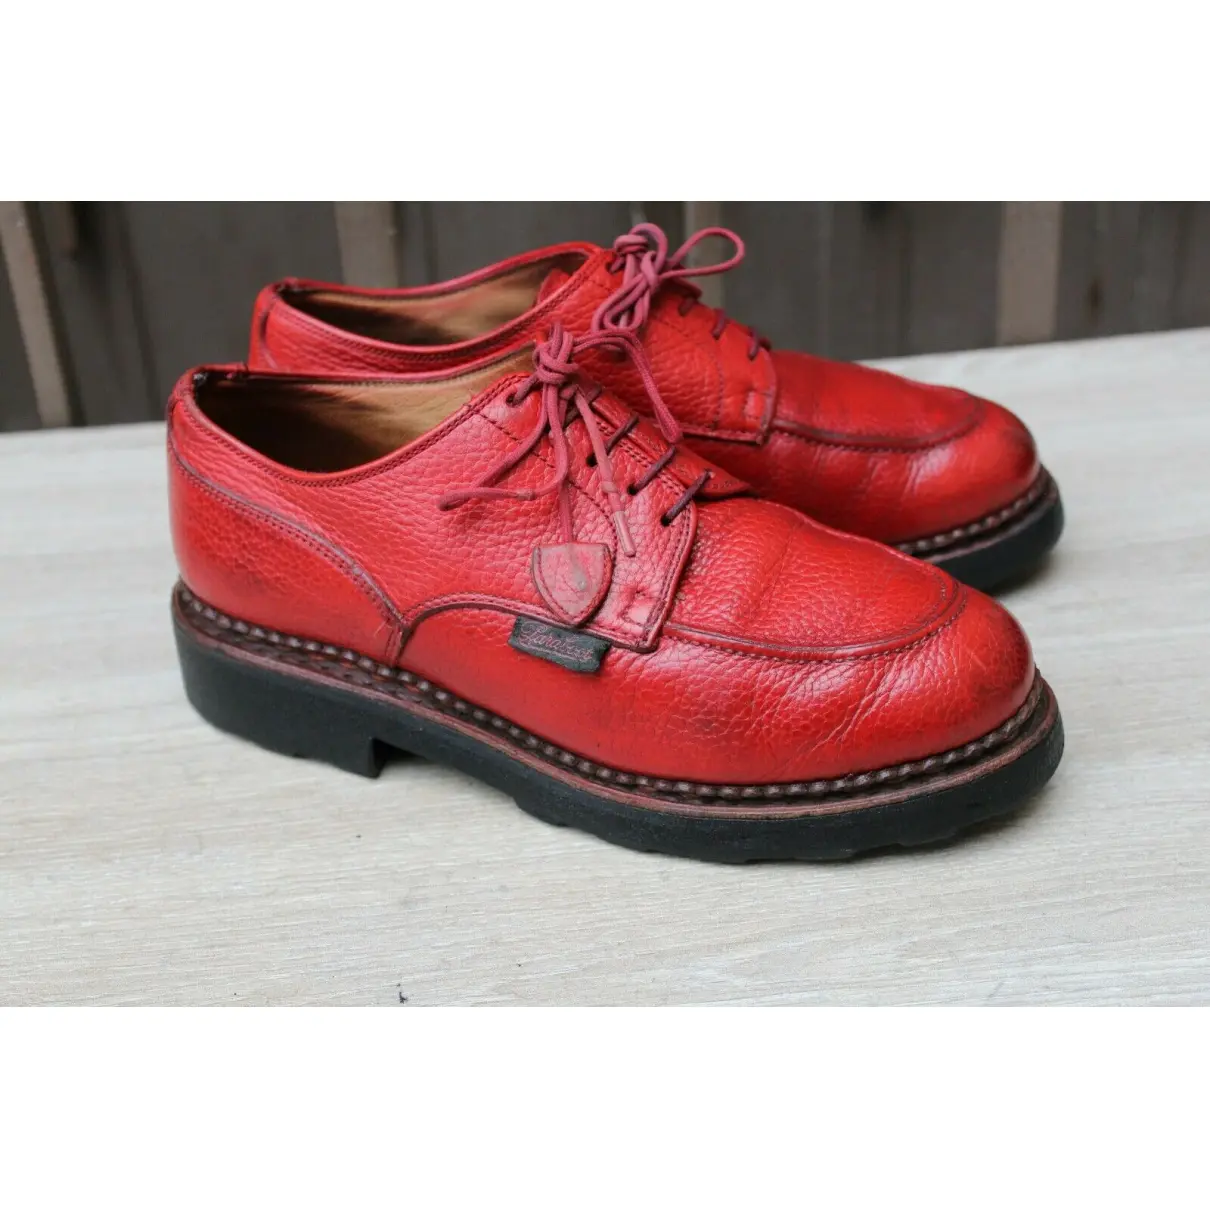 Leather lace ups Paraboot